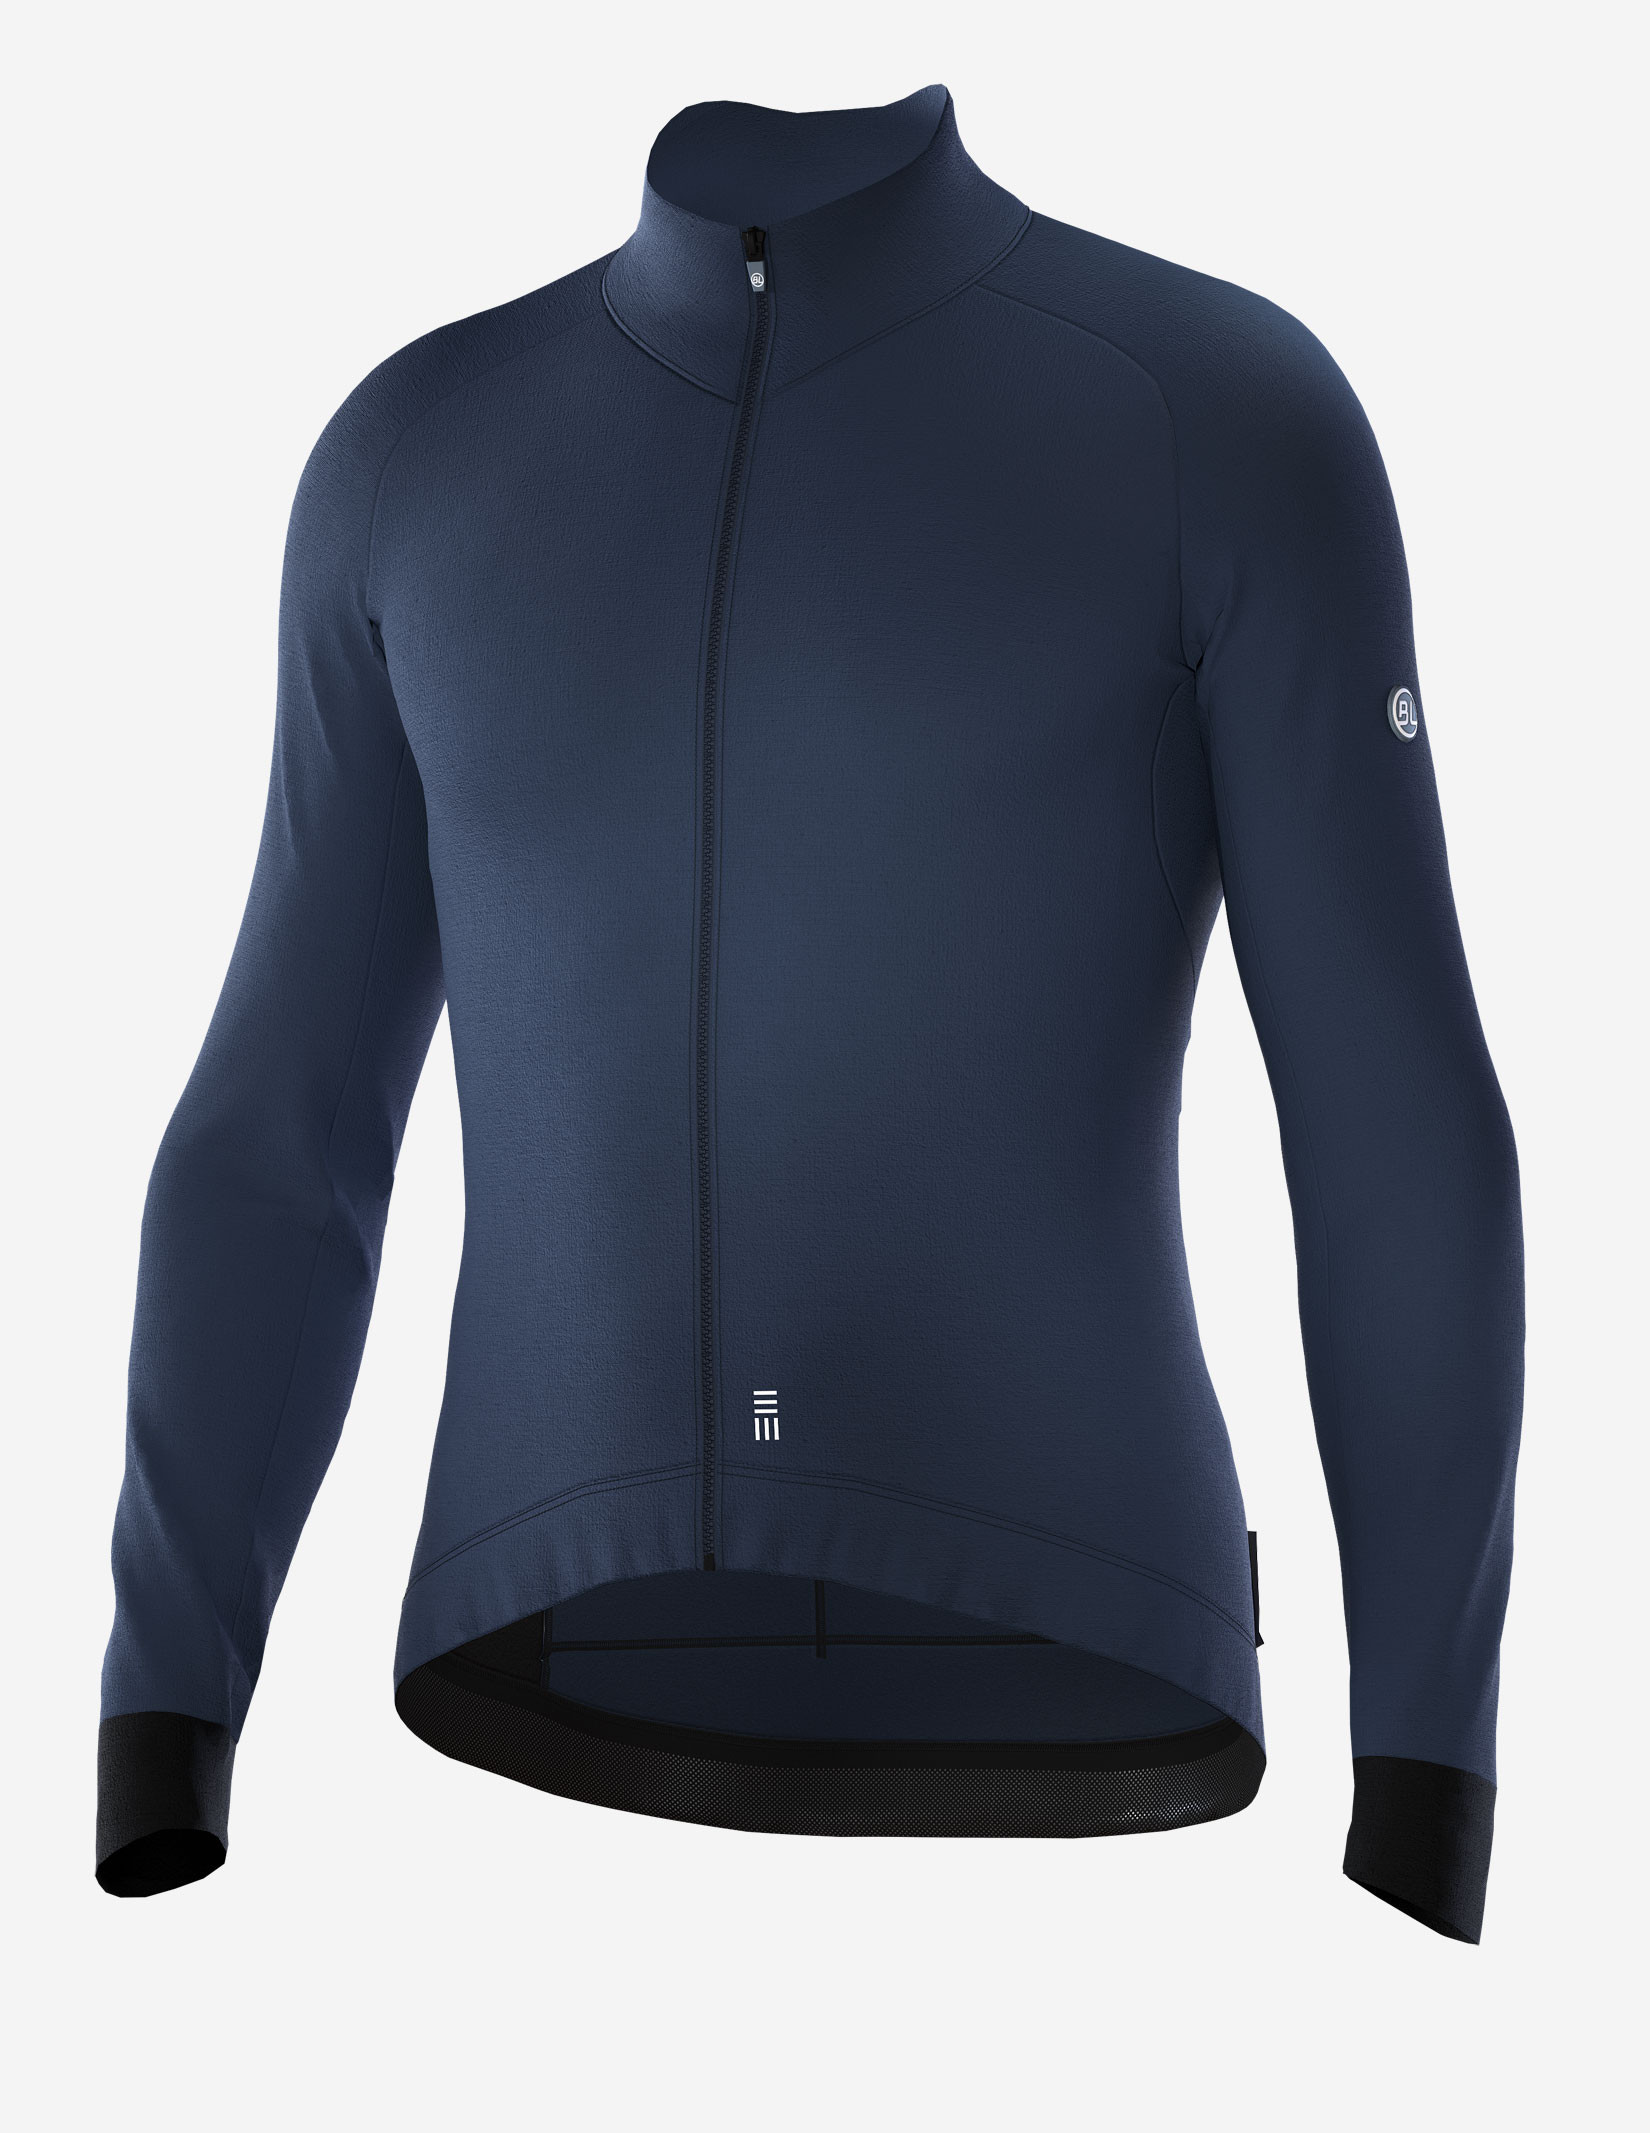 Men's thermal cycling jacket PELTRA ULTRA | BL Bicycle Line